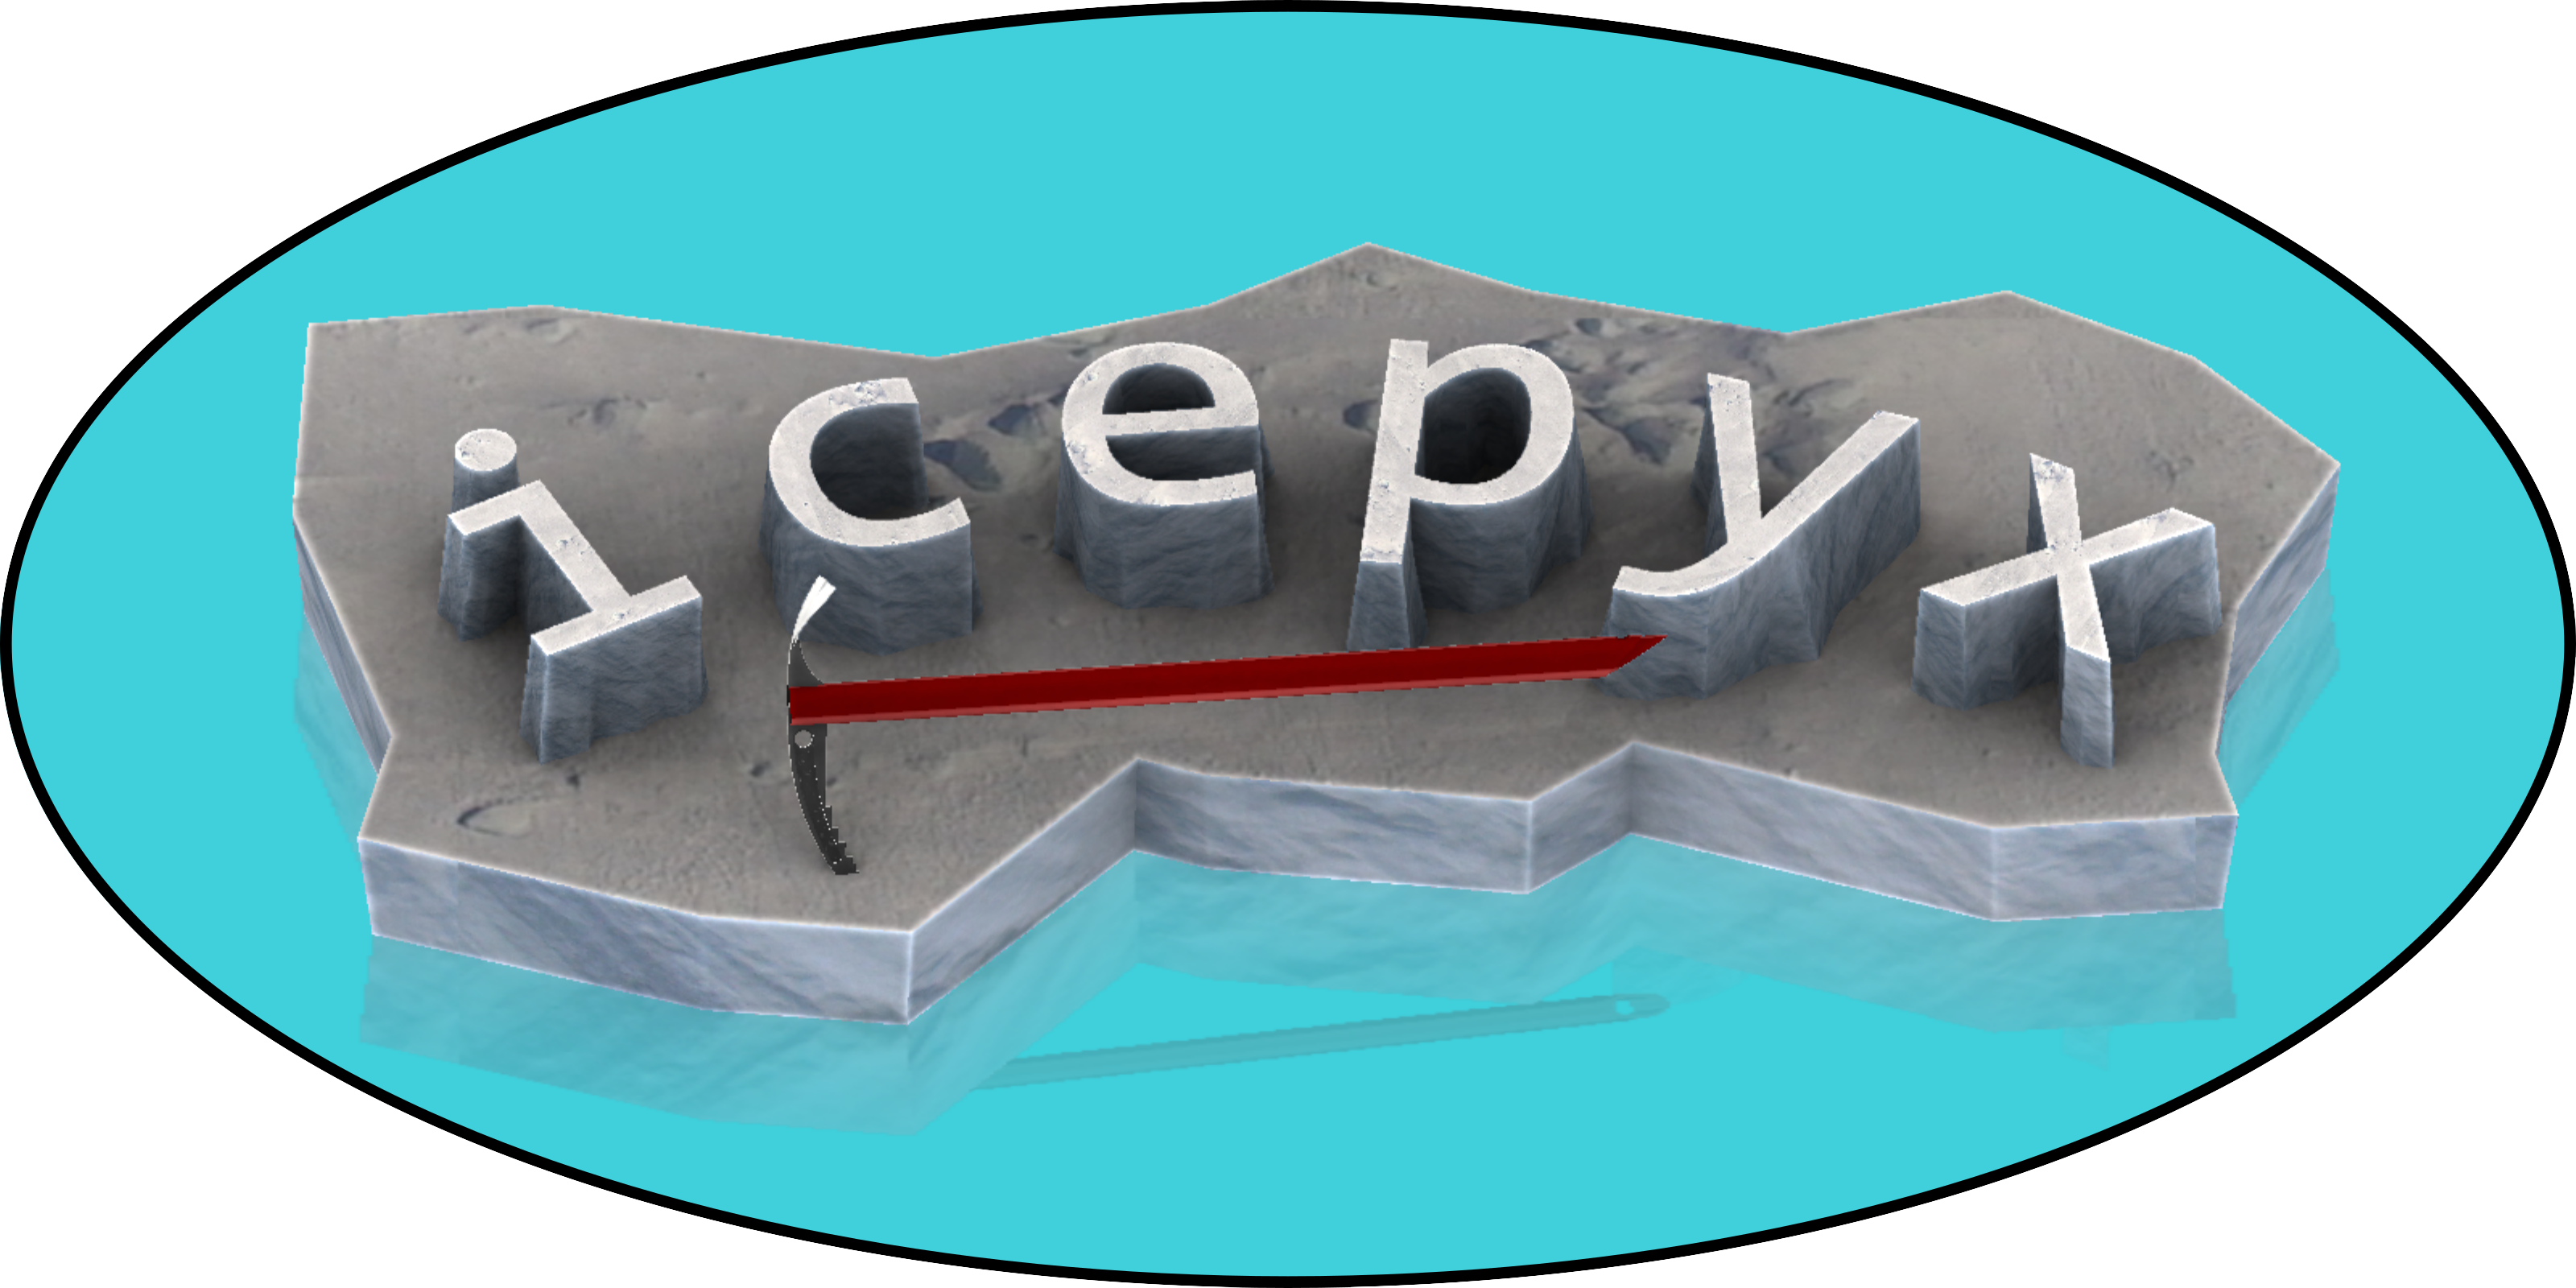 icepyx logo of the word icepyx in raised letters on an iceberg with an ice ax